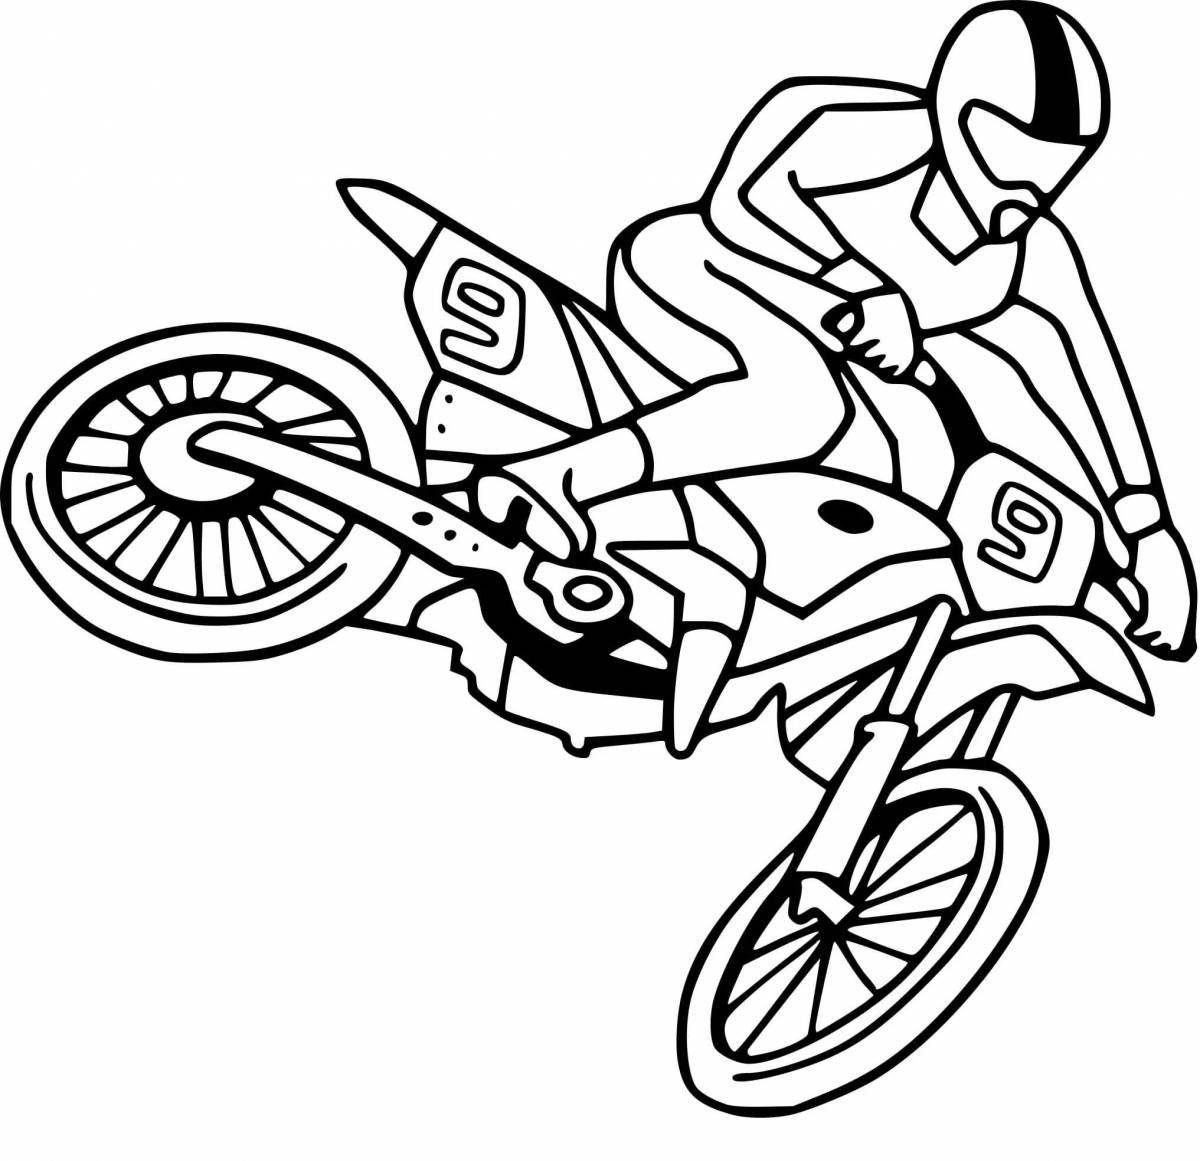 Bright motocross coloring page